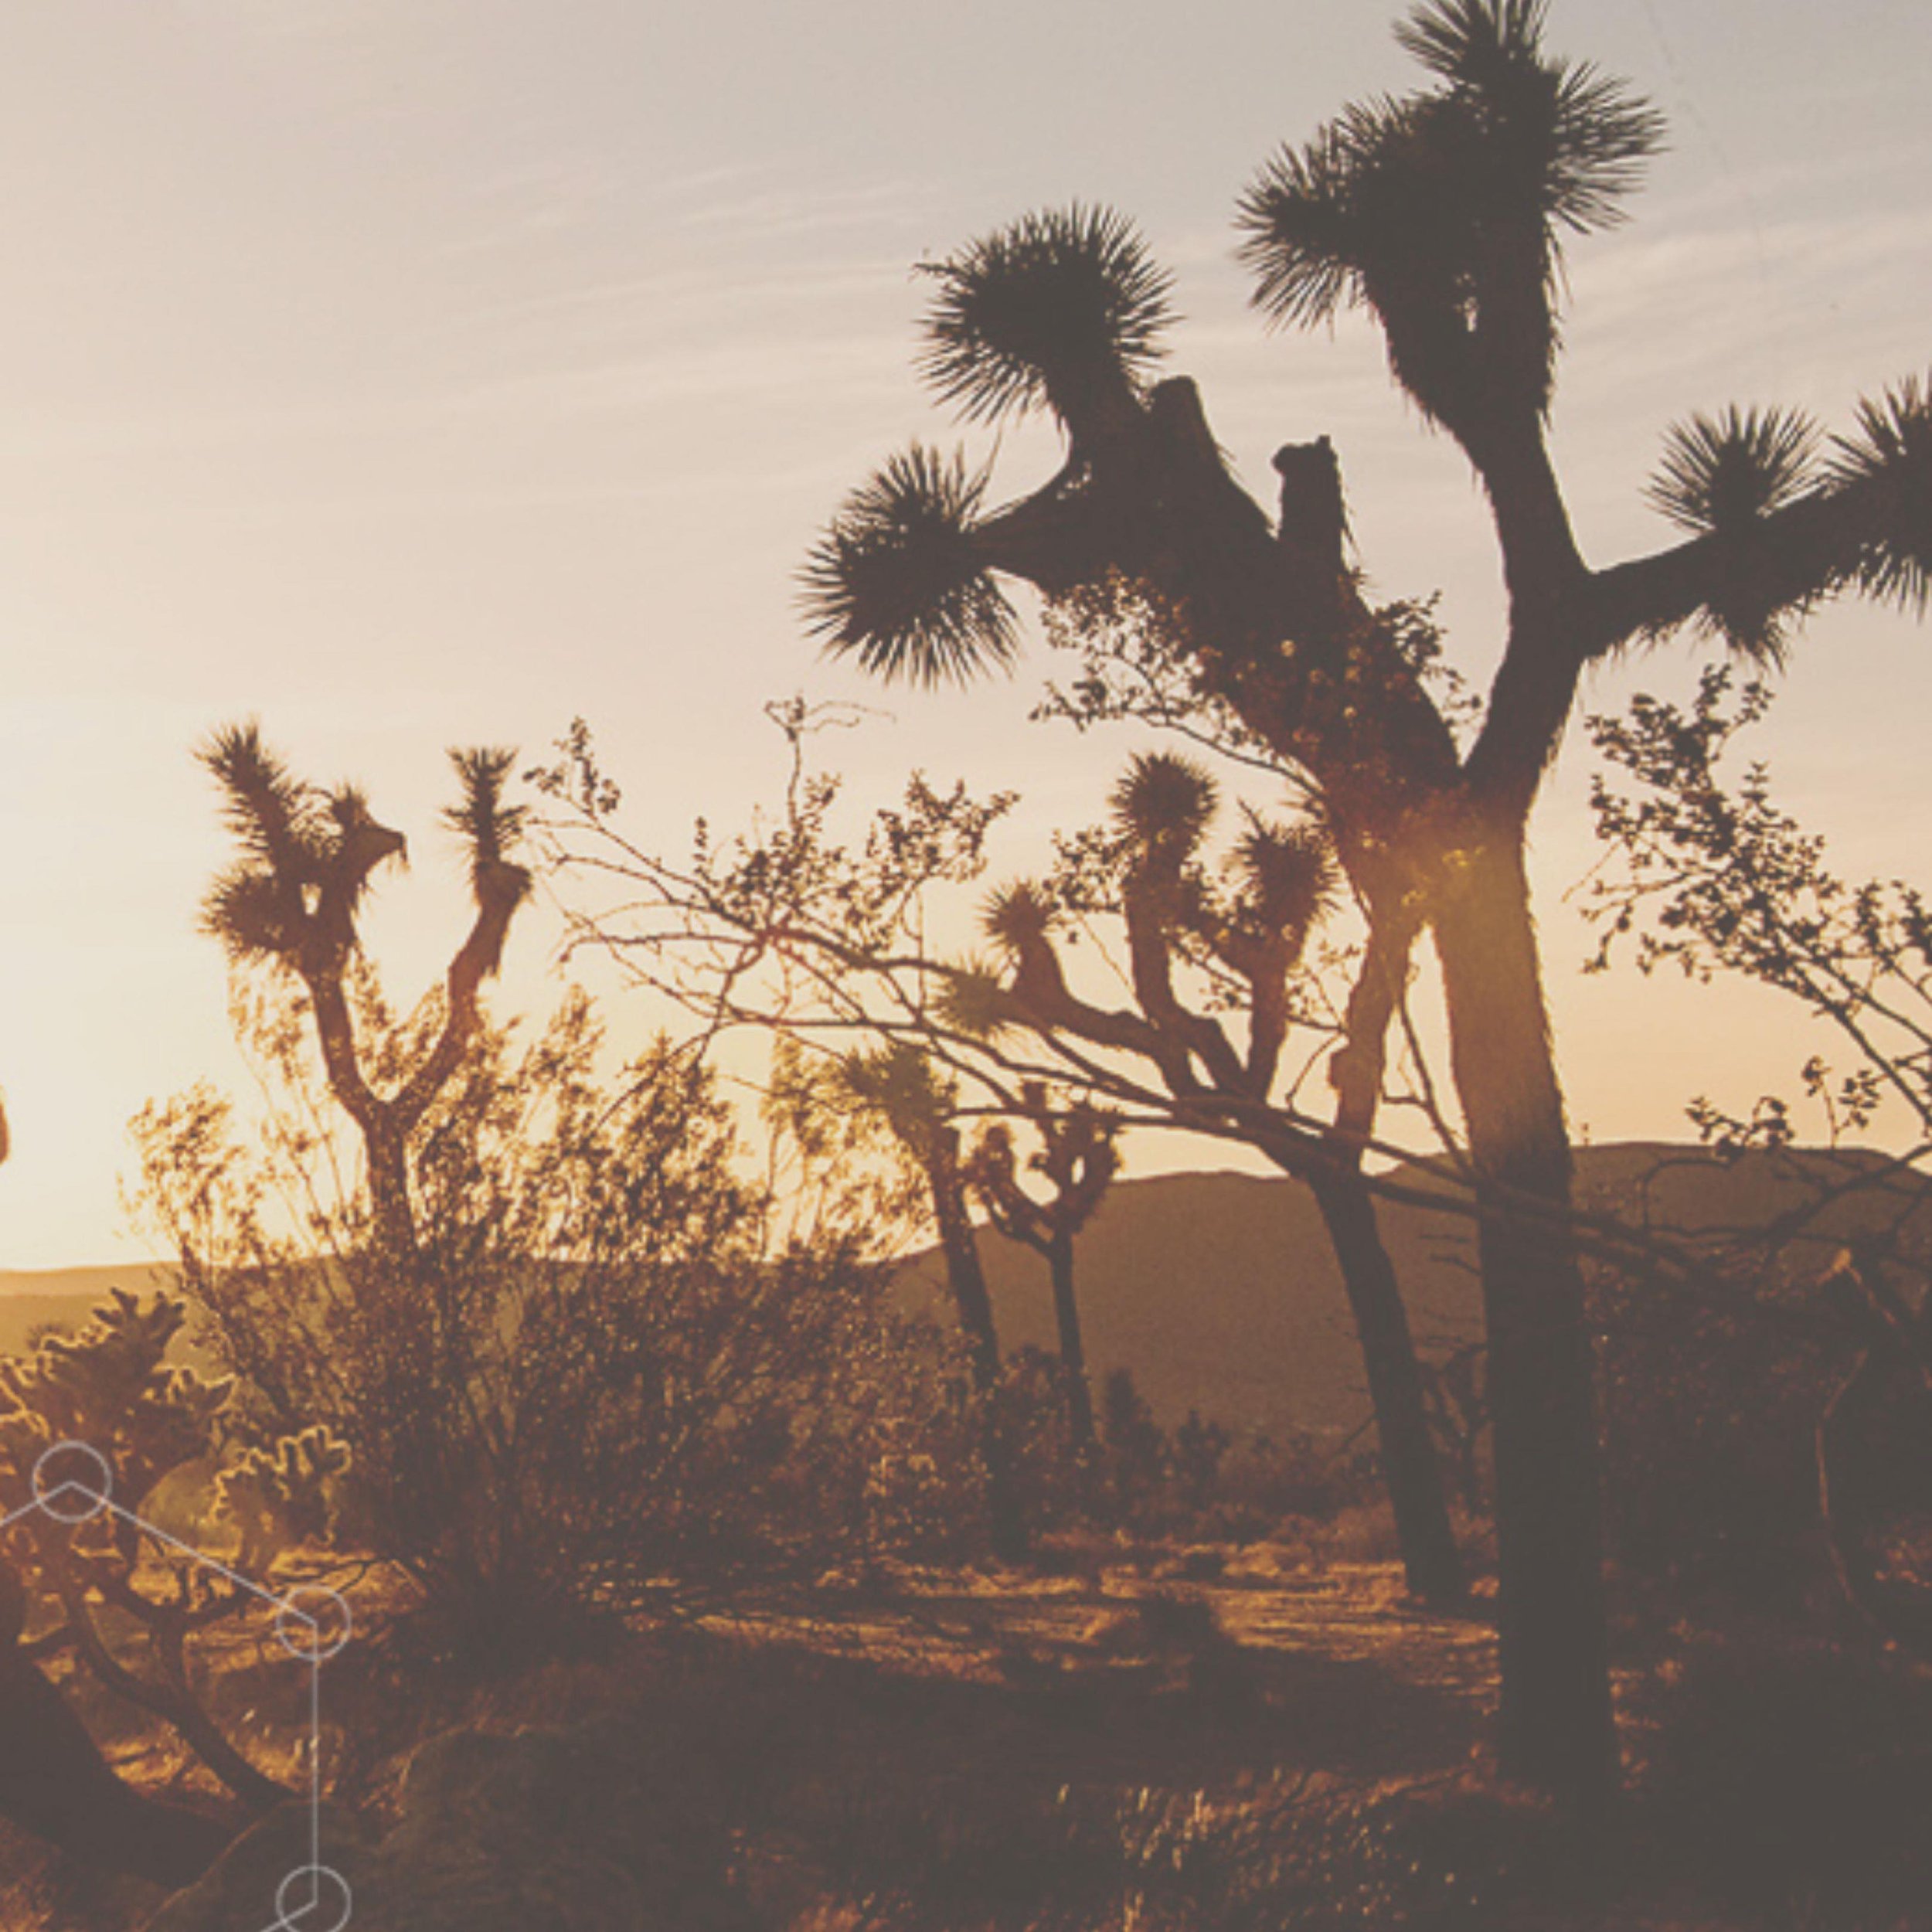 Have you been spending enough time in nature?

We are so grateful to be located so close to the Joshua Tree National Park in this magical hi-desert area filled with beautiful hiking trails, breathtaking panoramas and awe inspiring skies! Every day is